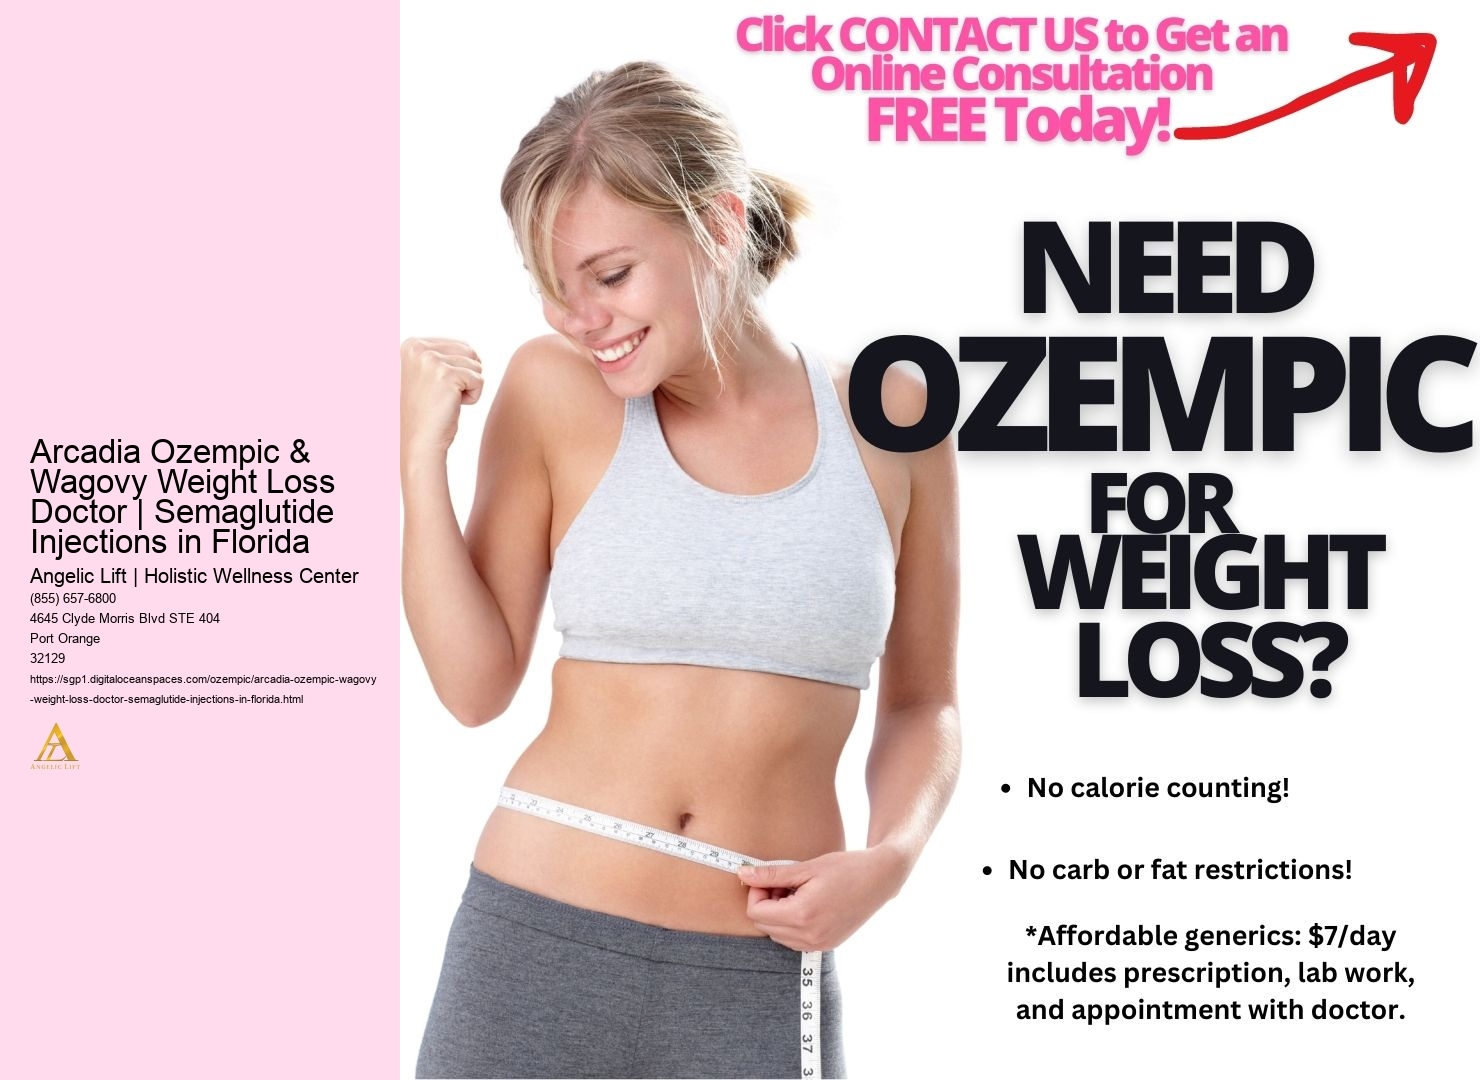 Arcadia Ozempic & Wagovy Weight Loss Doctor | Semaglutide Injections in Florida